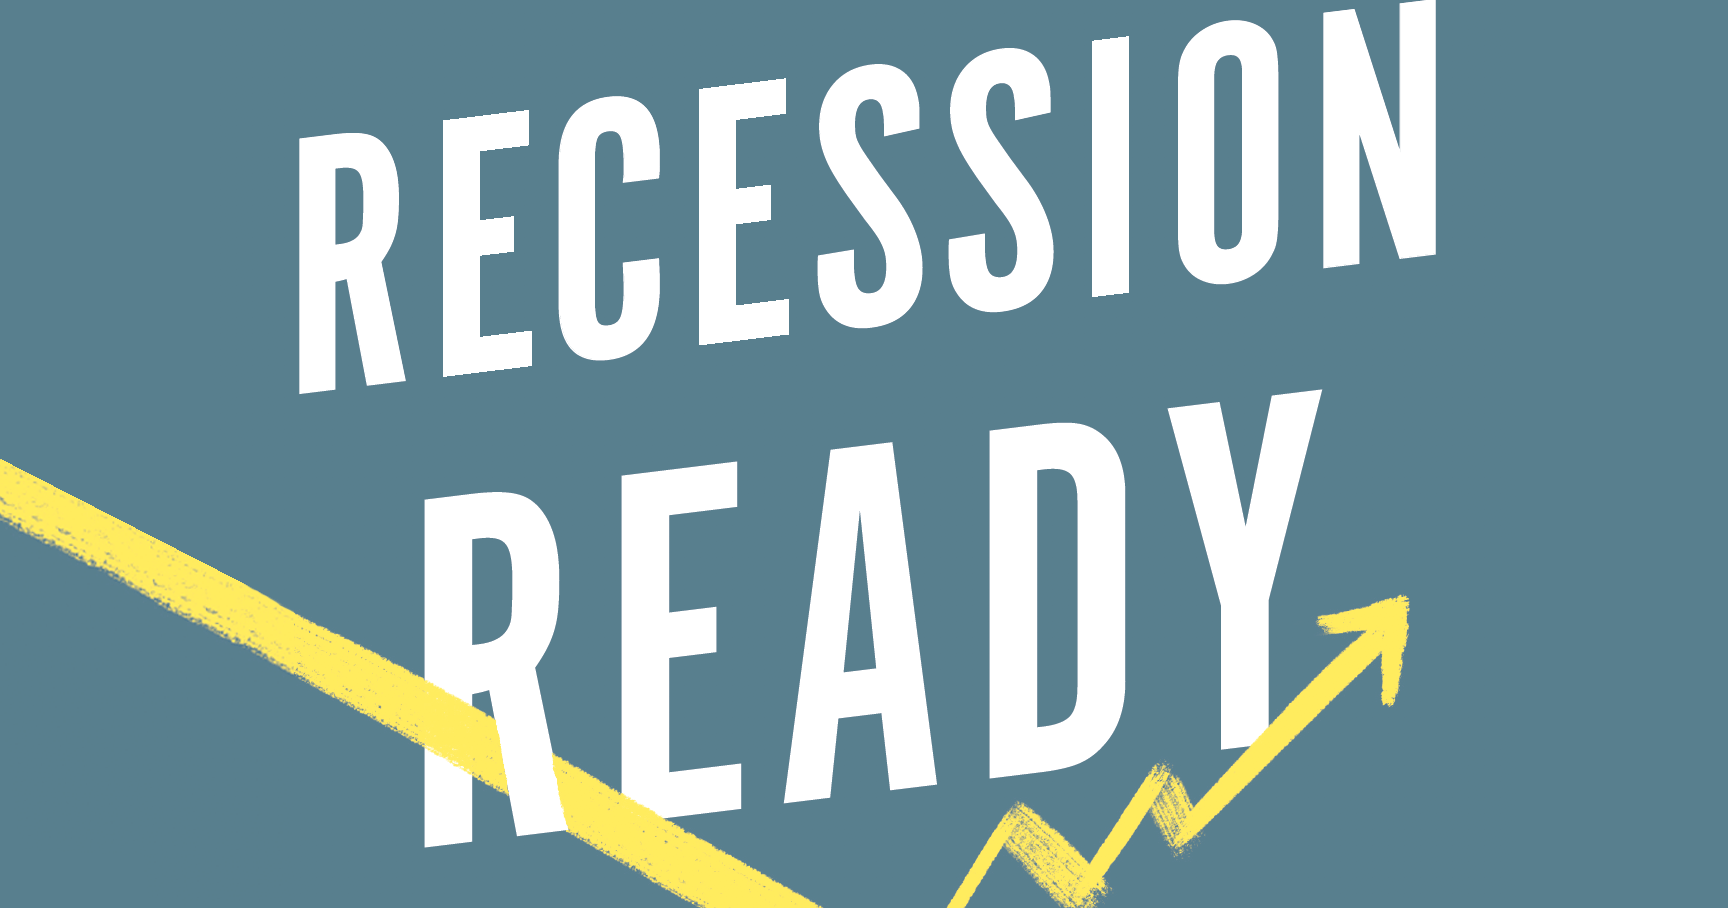 In <em>Recession Ready</em>, experts from academia and the policy community propose six big ideas to be triggered when the economy shows clear, proven signs of heading into a recession.